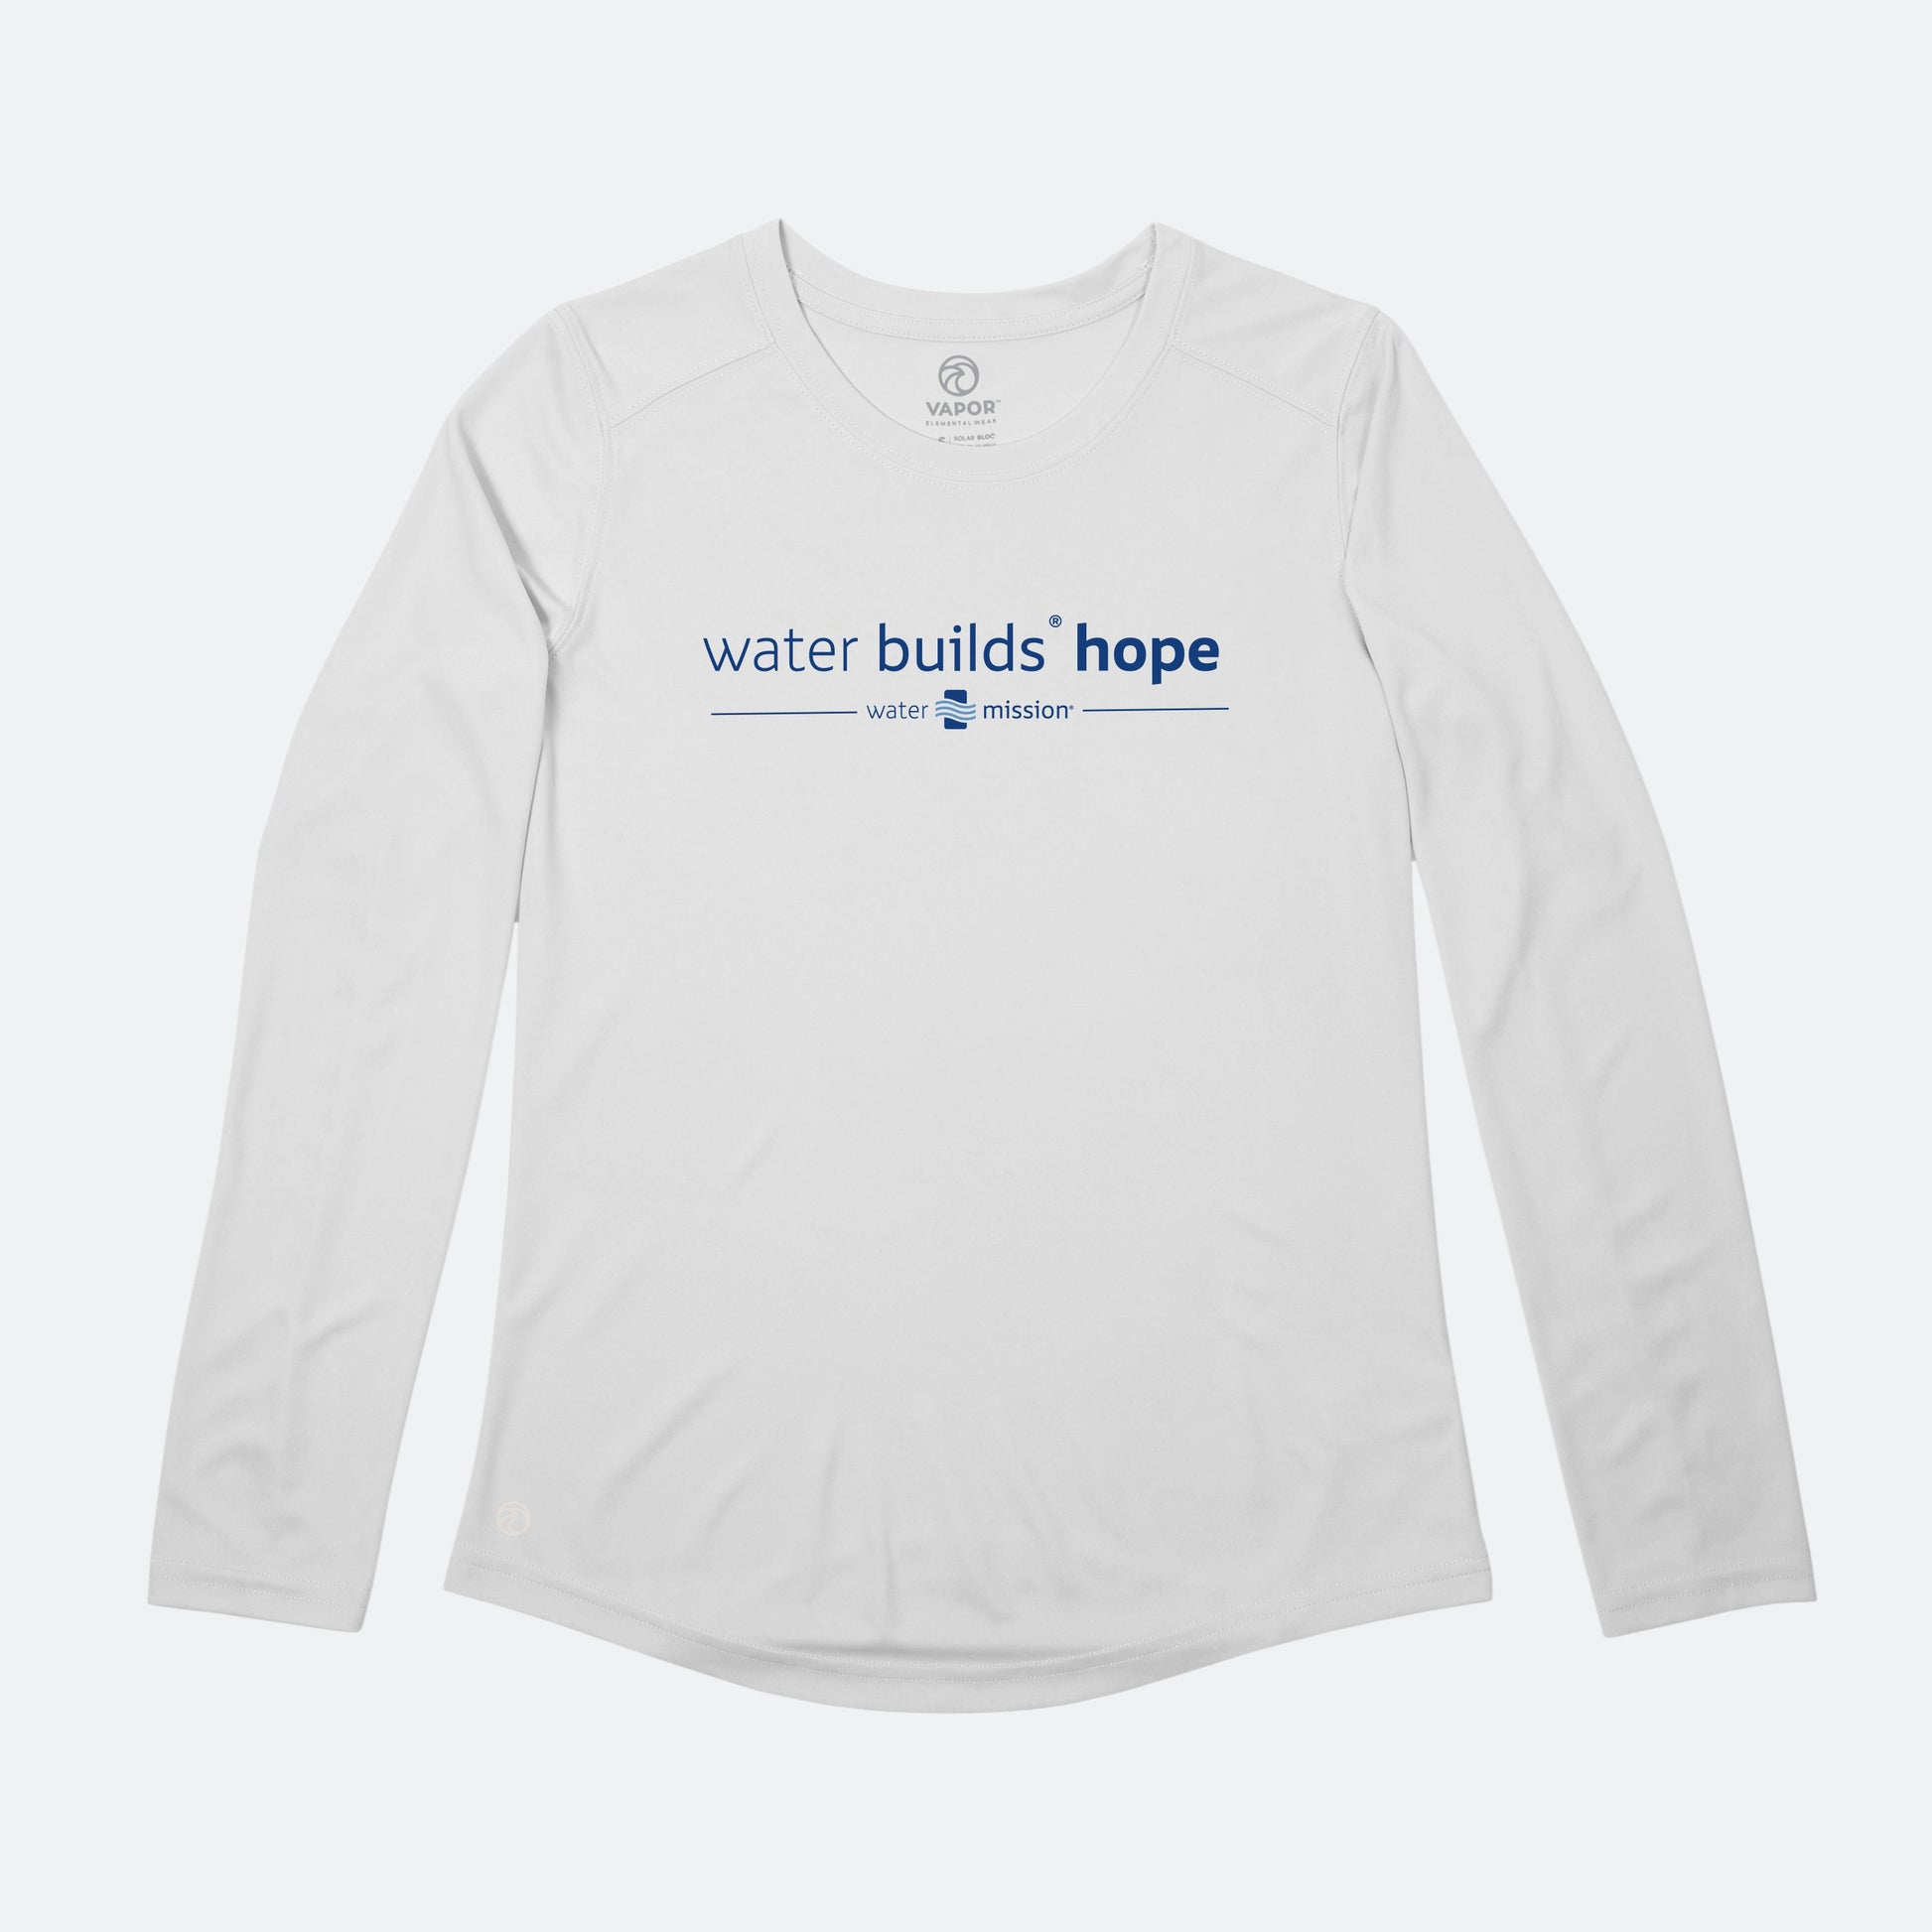 Vapor Apparel Sun Protection Women's Water Mission Hope Eco Sol Shirt